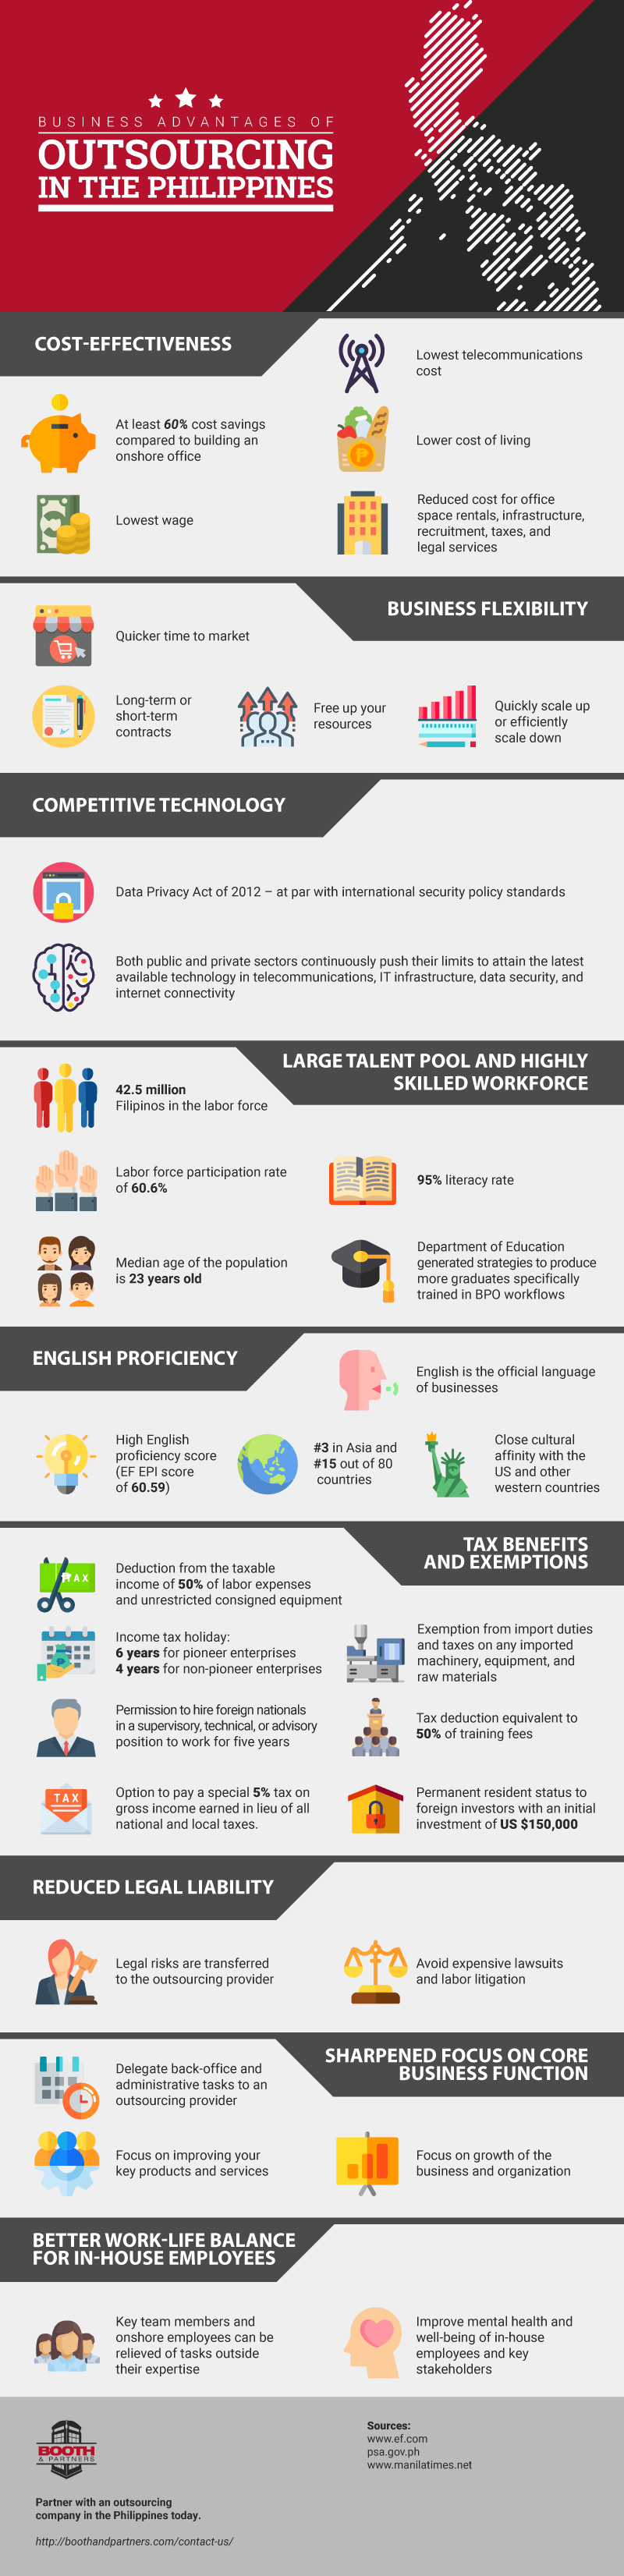 Business-Advantages-of-Outsourcing-in-the-Philippines-infographic(1)